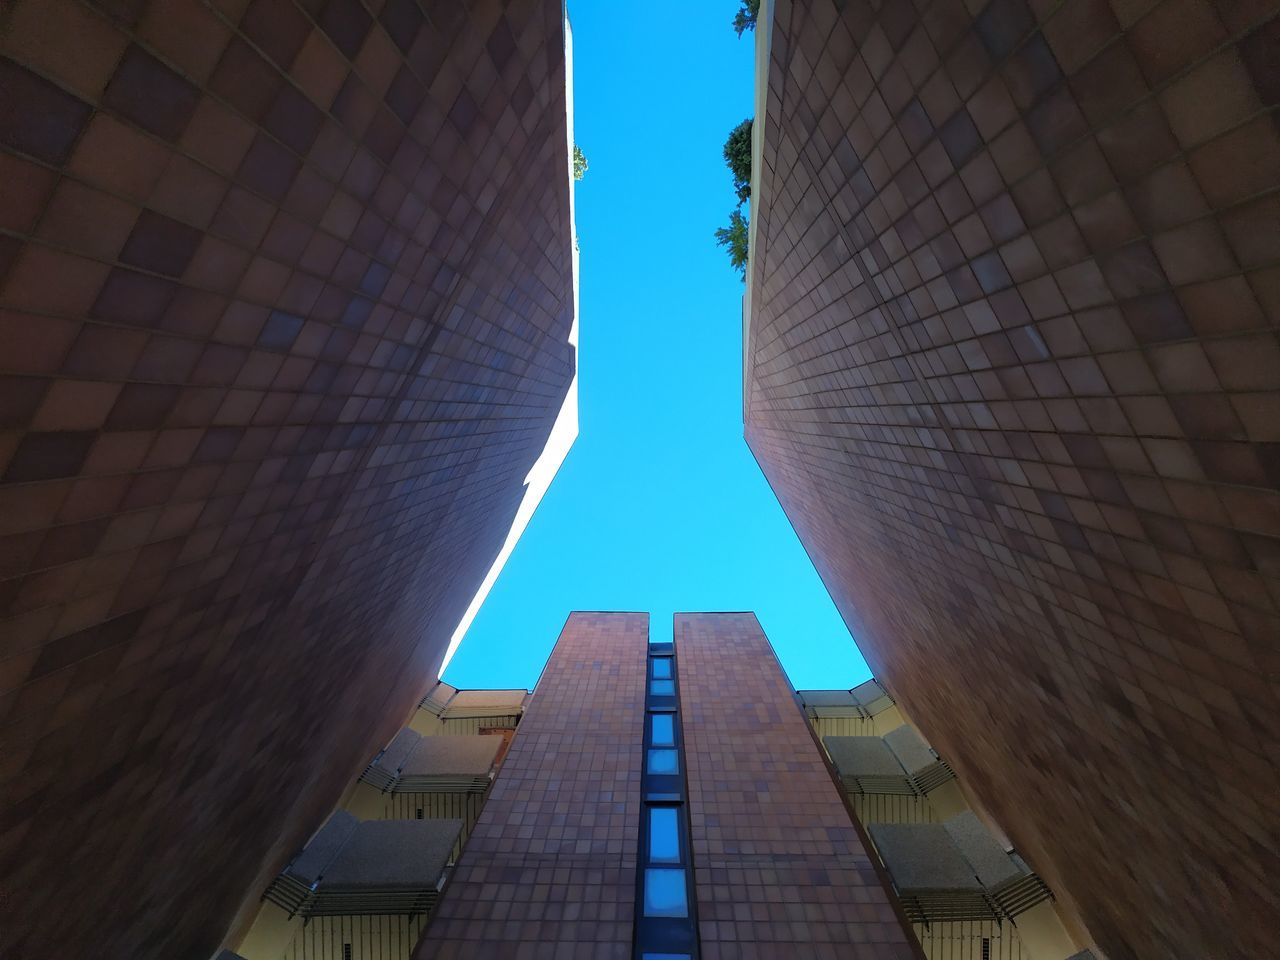 LOW ANGLE VIEW OF MODERN BUILDINGS AGAINST SKY